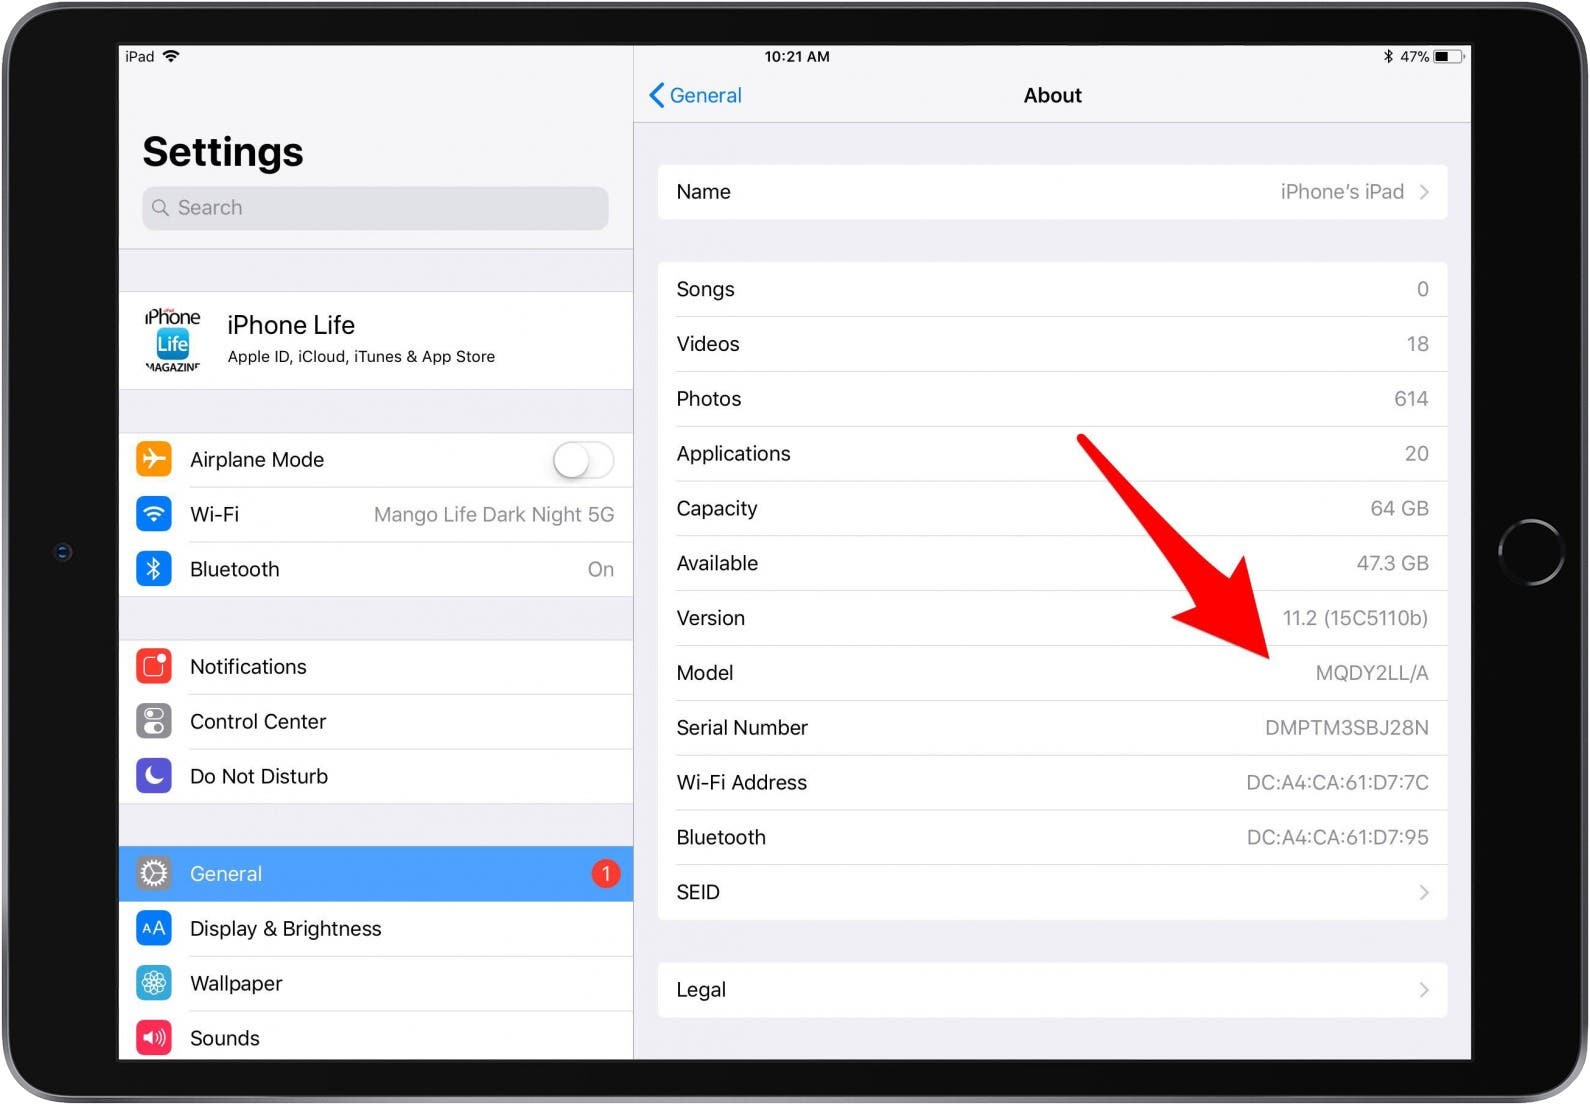 how to get page numbers on kindle app for ipad